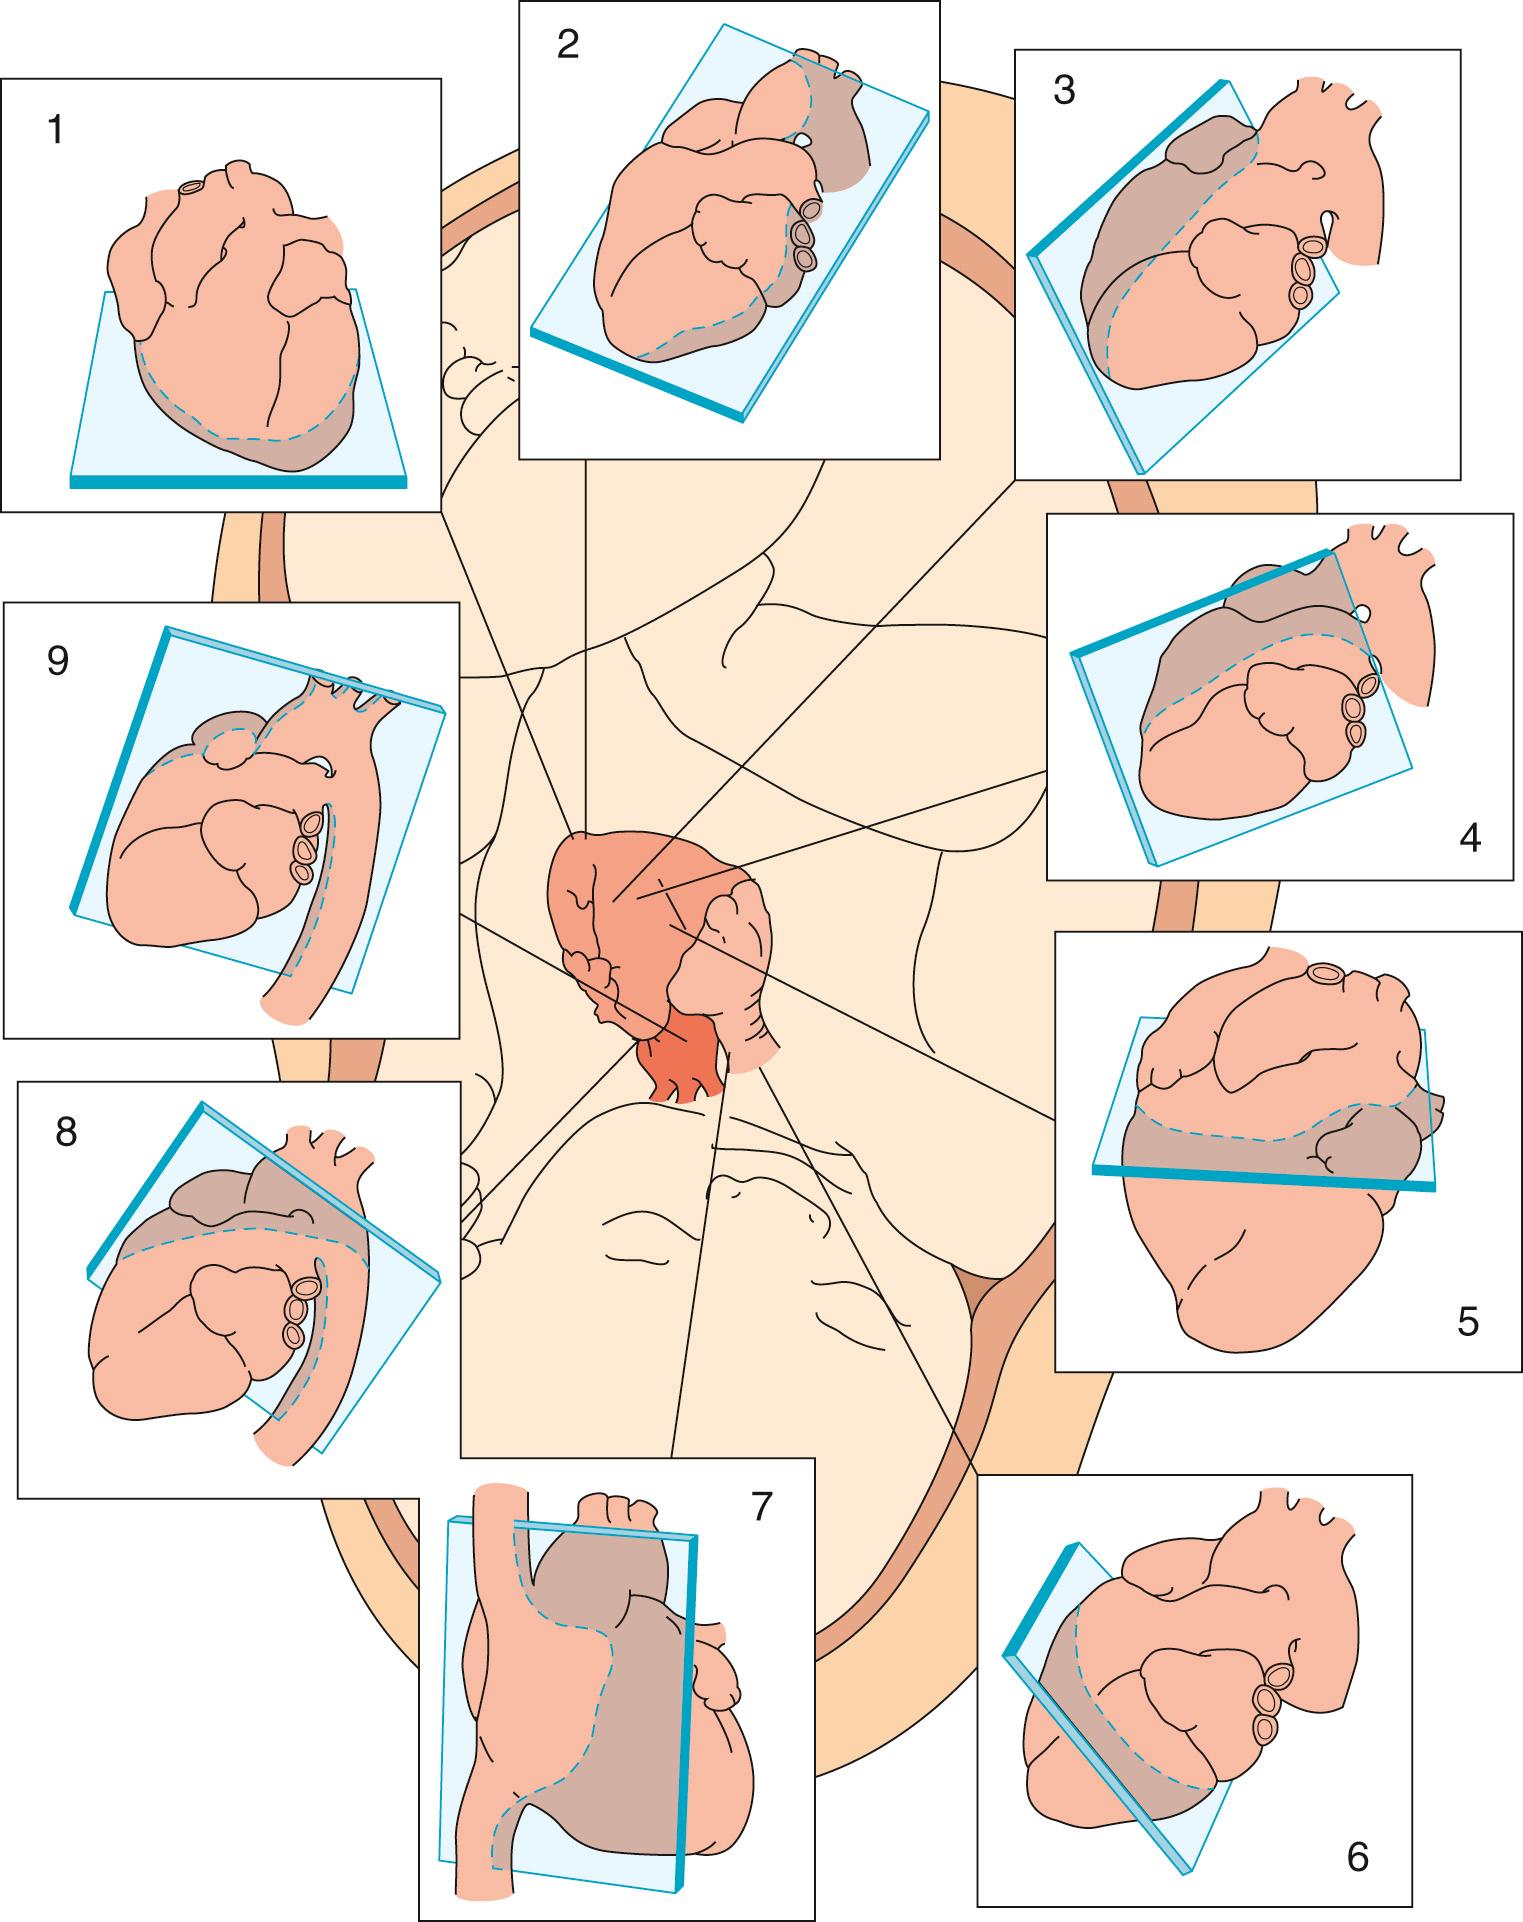 Fig. 8.1, Tomographic planes used to image the fetal cardiovascular system. Imaging planes displayed are in a normal human fetus. Starting at the top left, the following views are demonstrated in a clockwise manner: 1 , apical (four-chamber) view; 2 , apical (five-chamber) view angled toward the aorta; 3 , long-axis view of the left ventricular outflow tract; 4 , long-axis view of the right ventricular outflow tract; 5 , short-axis view at the level of the great vessels; 6 , short-axis view with caudad angling at the level of the ventricles; 7 , caval long-axis view; 8 , ductal arch view; 9 , aortic arch view.